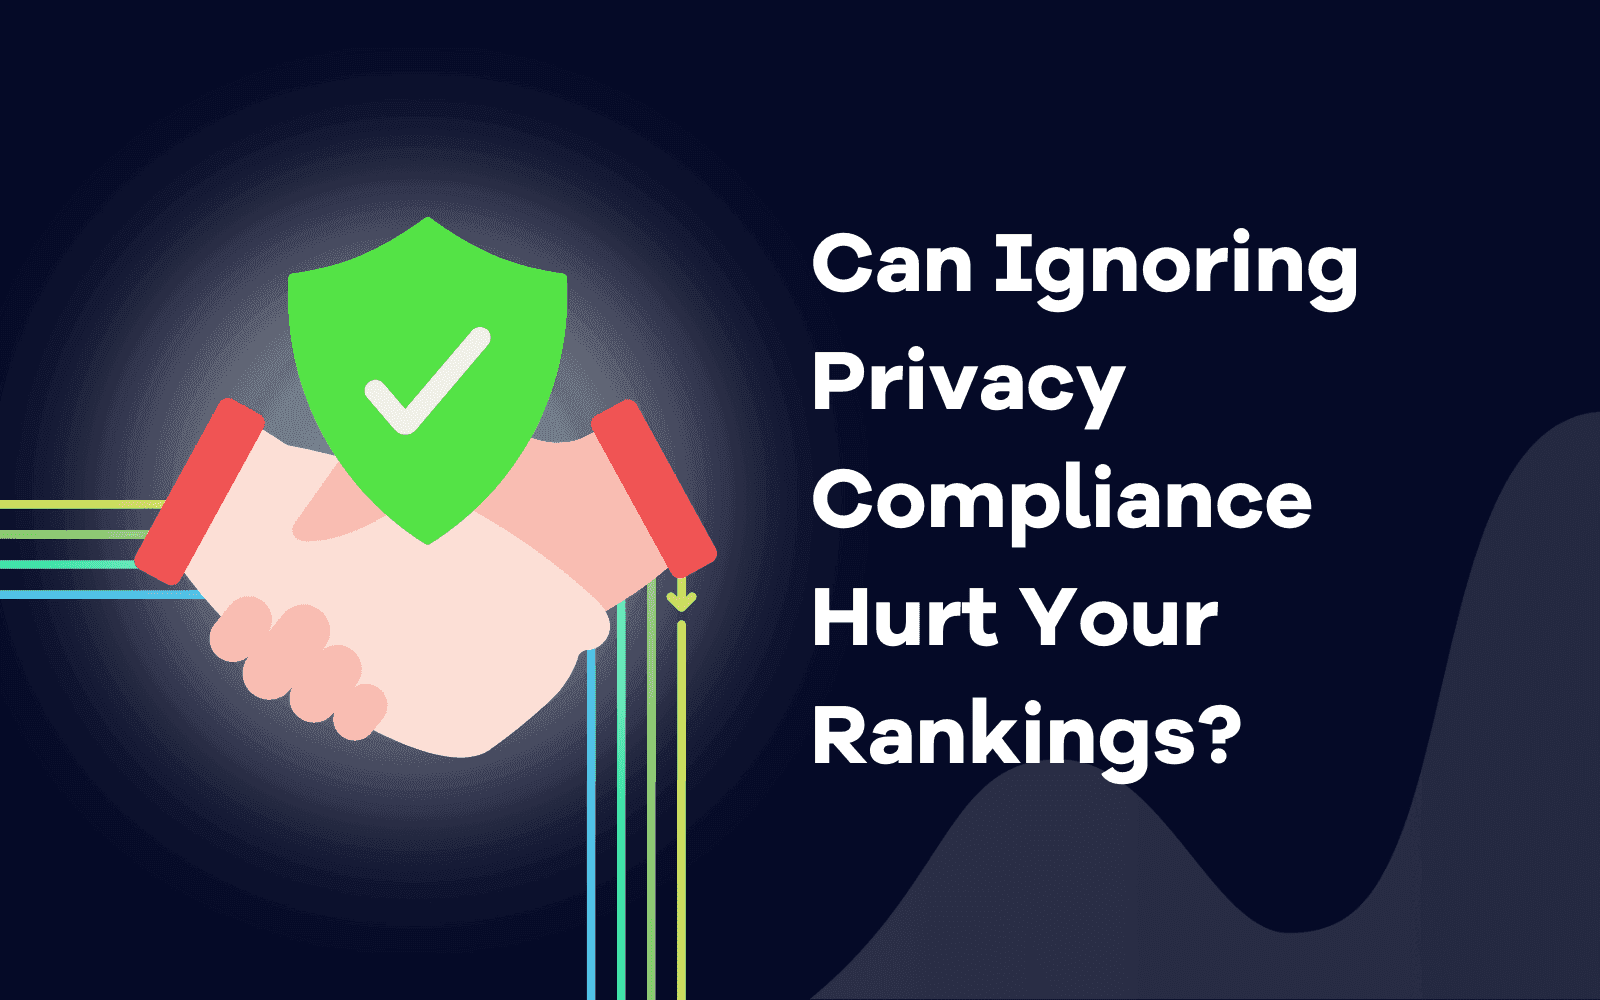 Can Ignoring Privacy Compliance Hurt Your Rankings